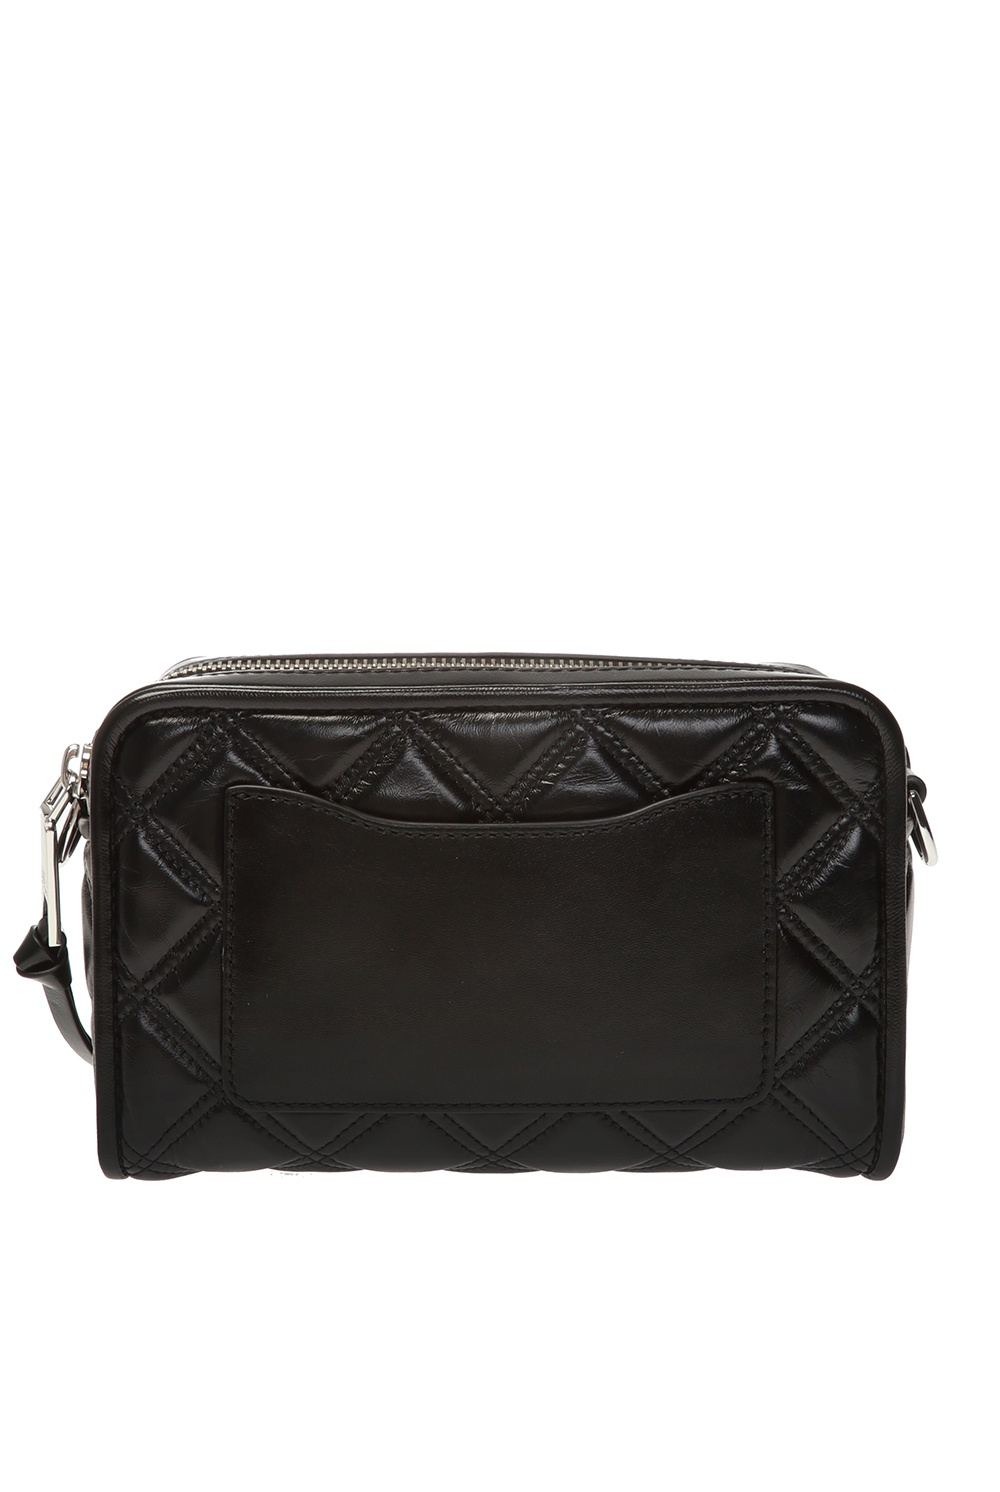 [Marc Jacobs] THE QUILTED SOFTSHOT 21 M0015419 001 BLACK